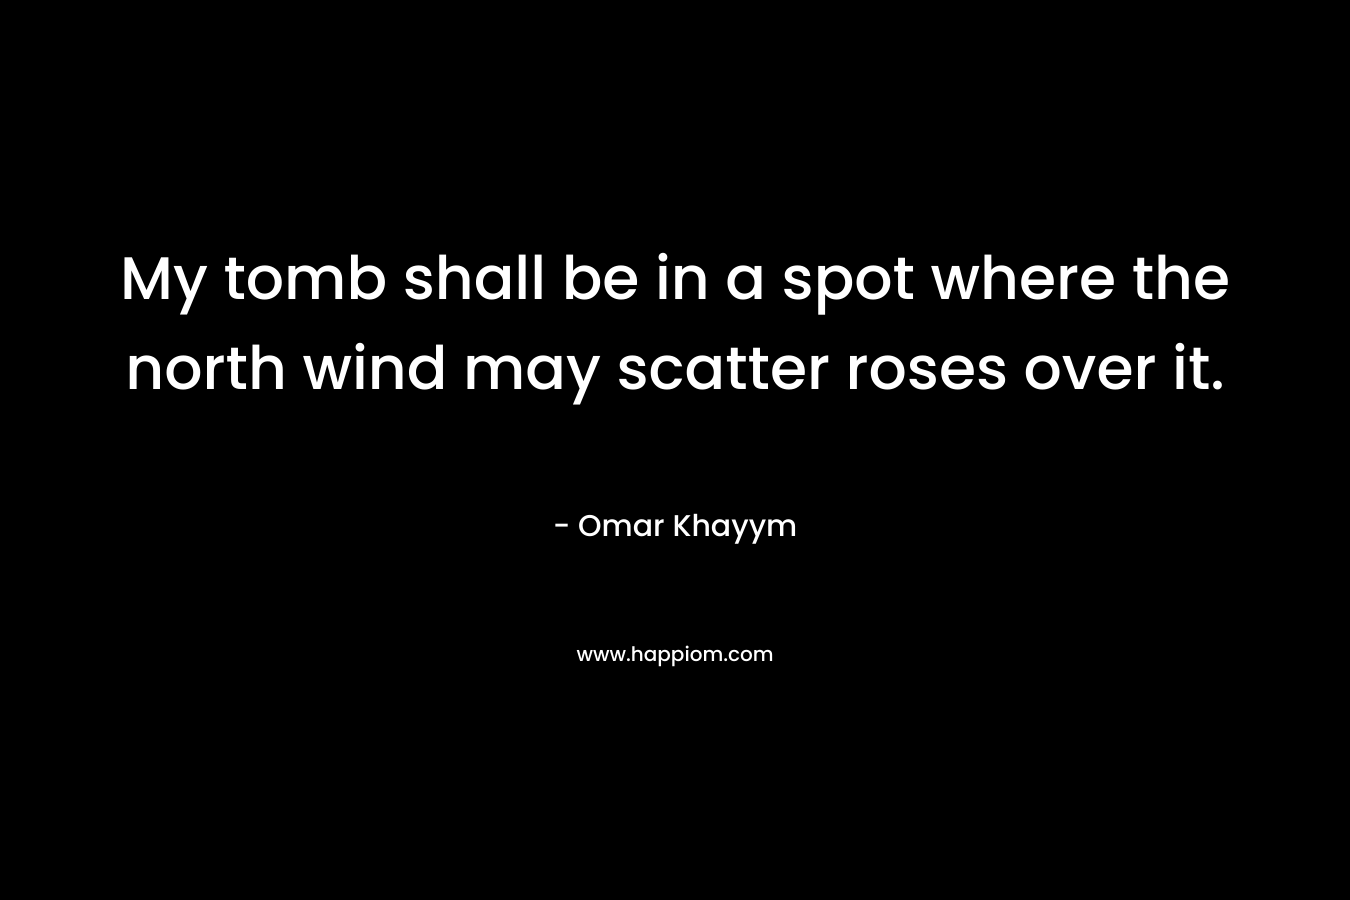 My tomb shall be in a spot where the north wind may scatter roses over it. – Omar Khayym